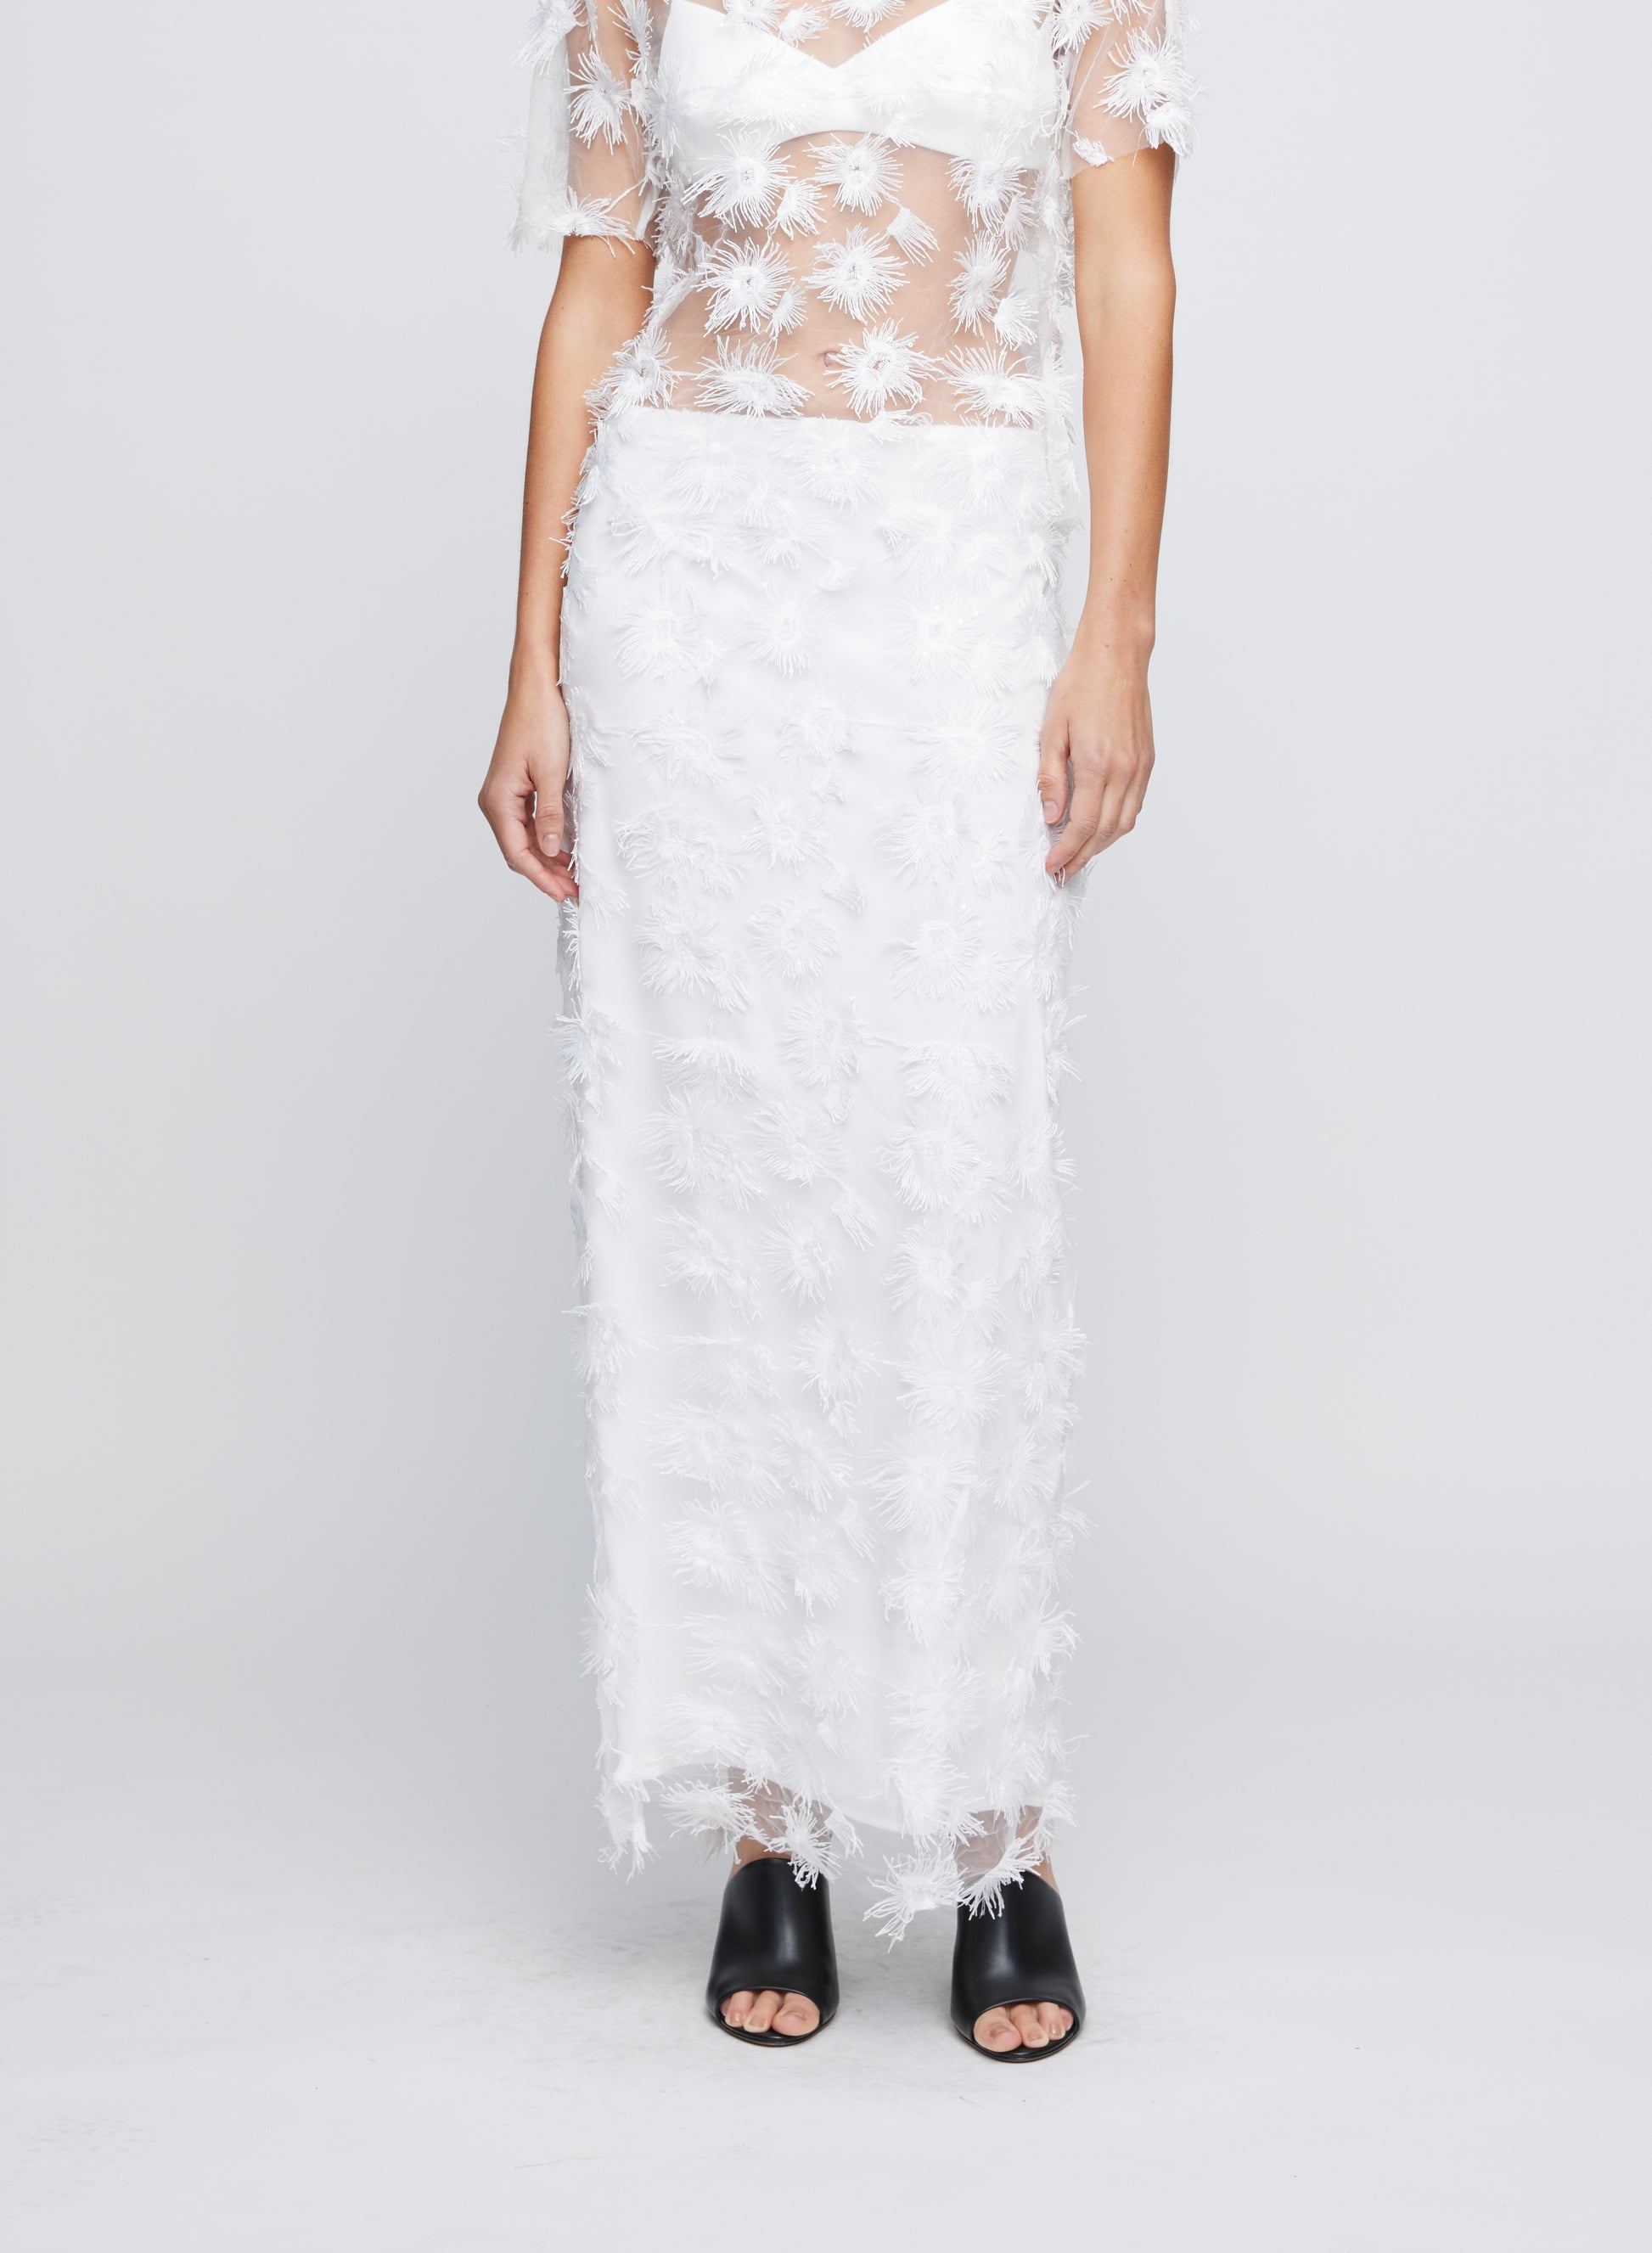 The Anna Quan Carmela Skirt in Dandelion is the perfect romantic occasion piece that sits mid to high on the waist and cut in a a sheer fabric with applique detailing.